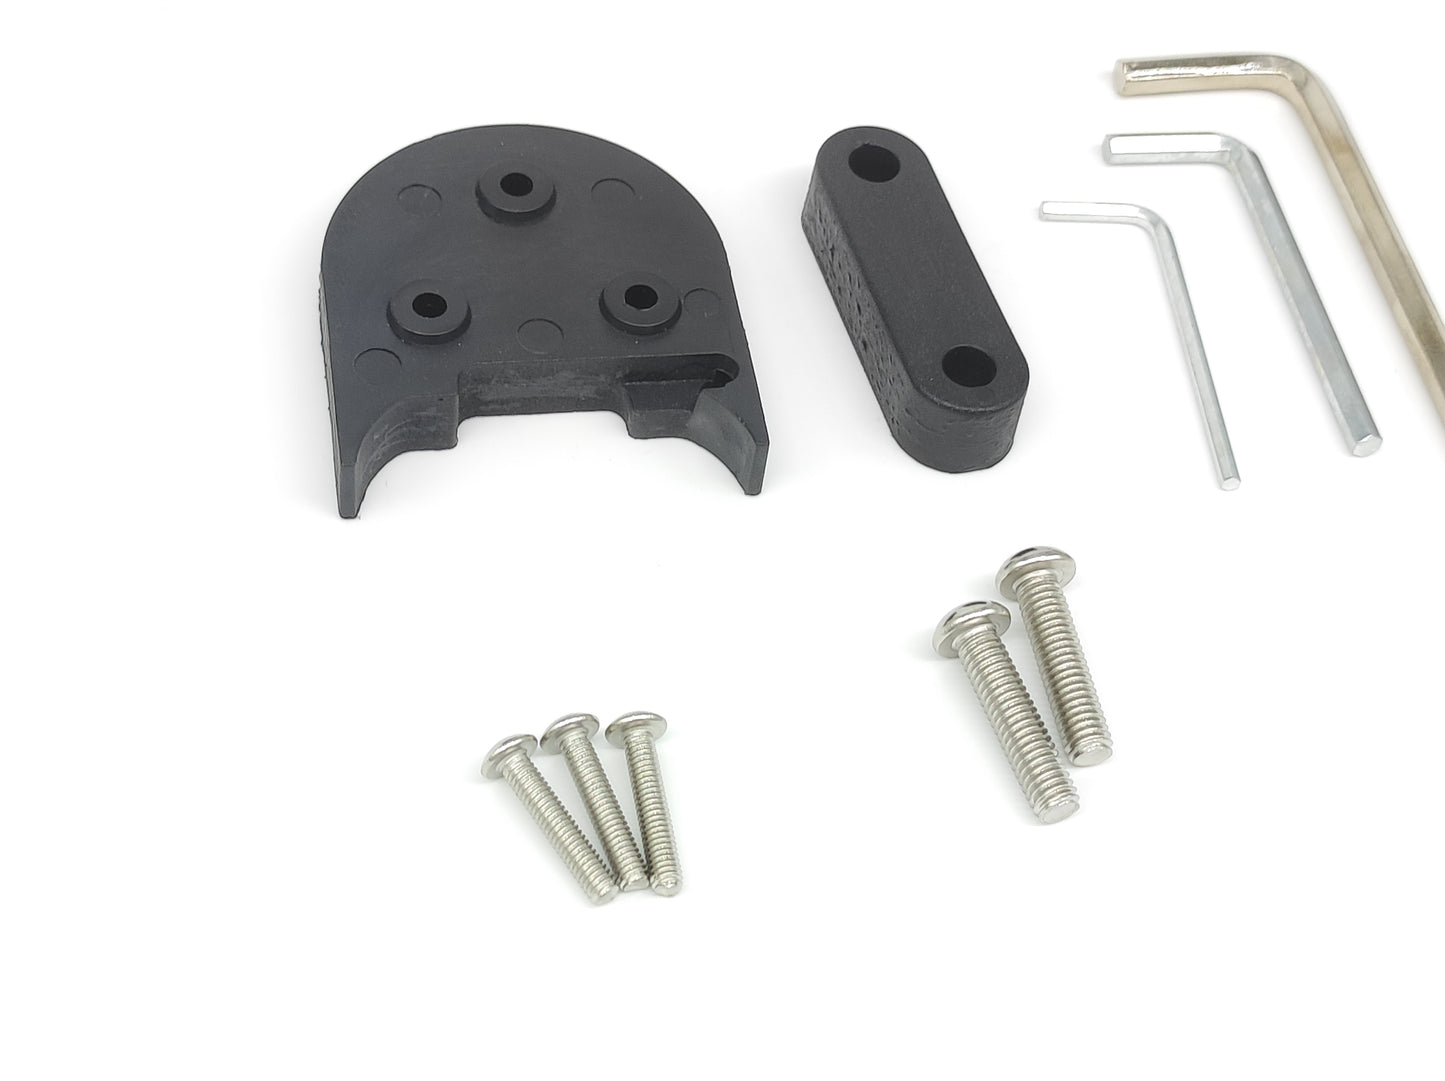 10 inch adapter set kickstand and reinforcement block for Xiaomi Mi 1s Pro 2 Mi 3 E-Scooter